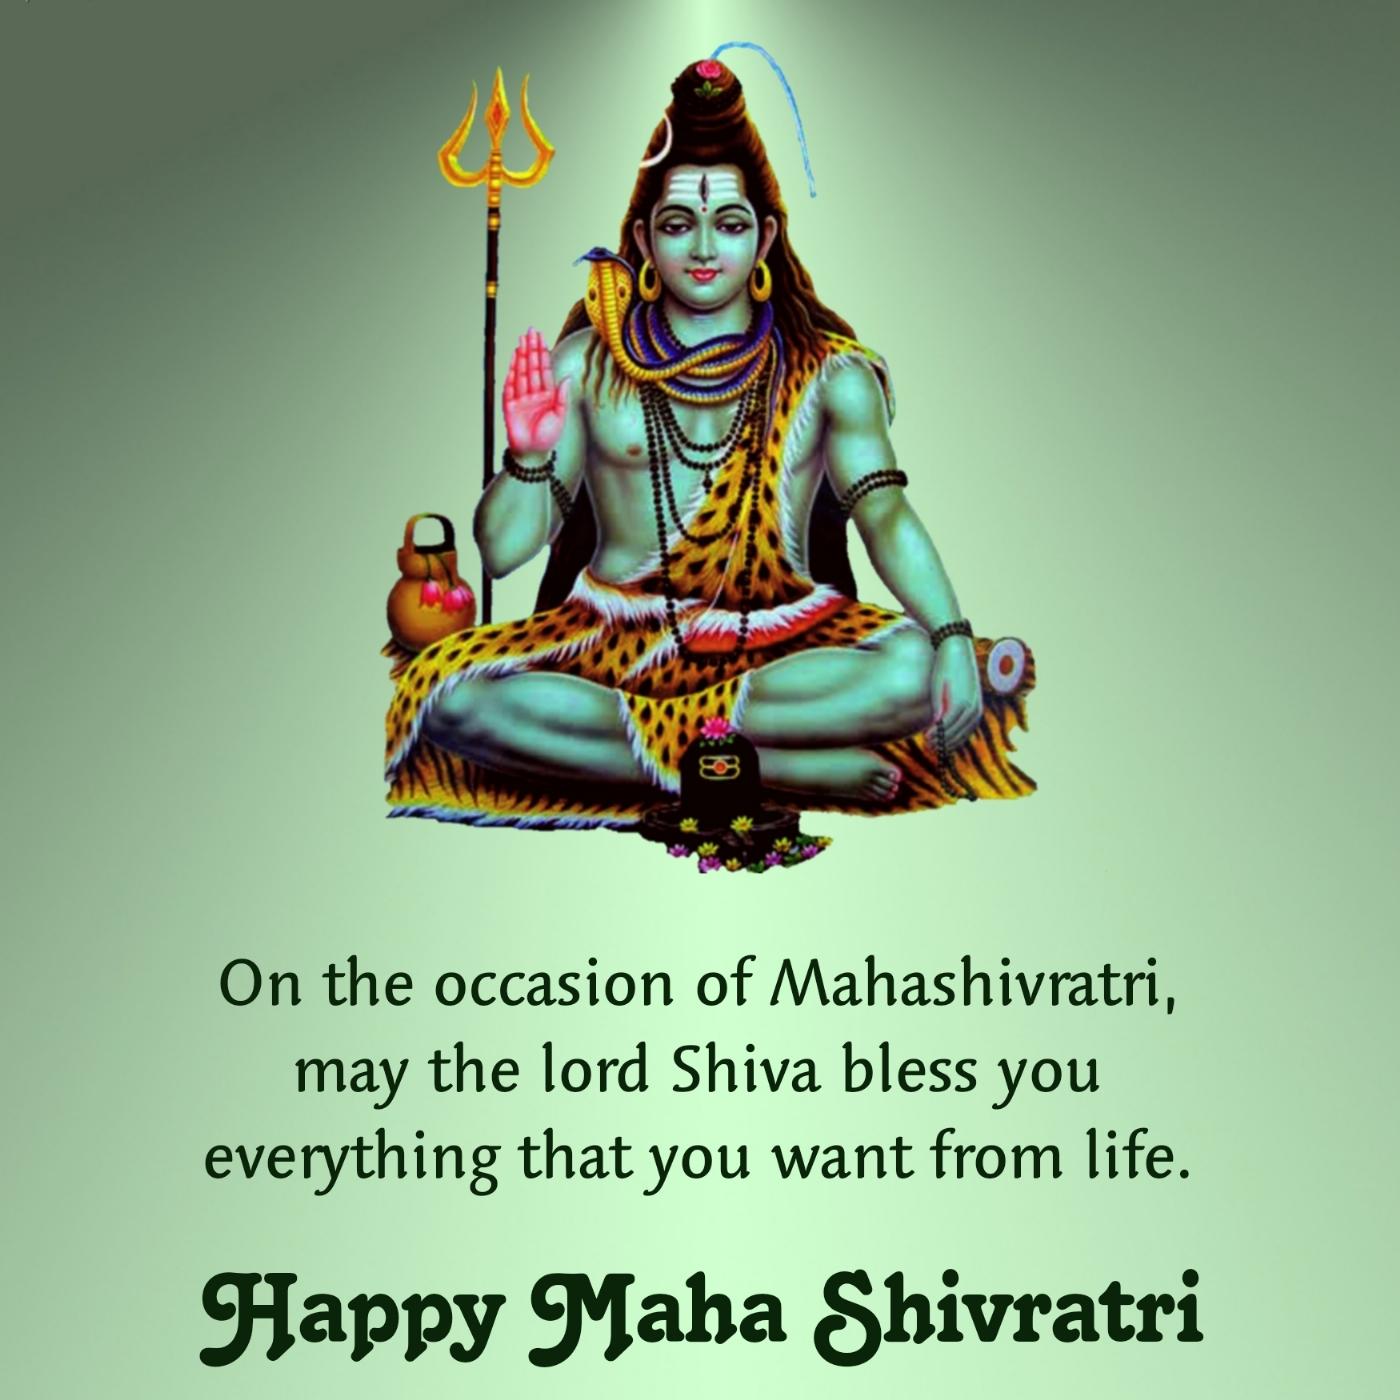 On the occasion of Mahashivratri may the lord Shiva bless you